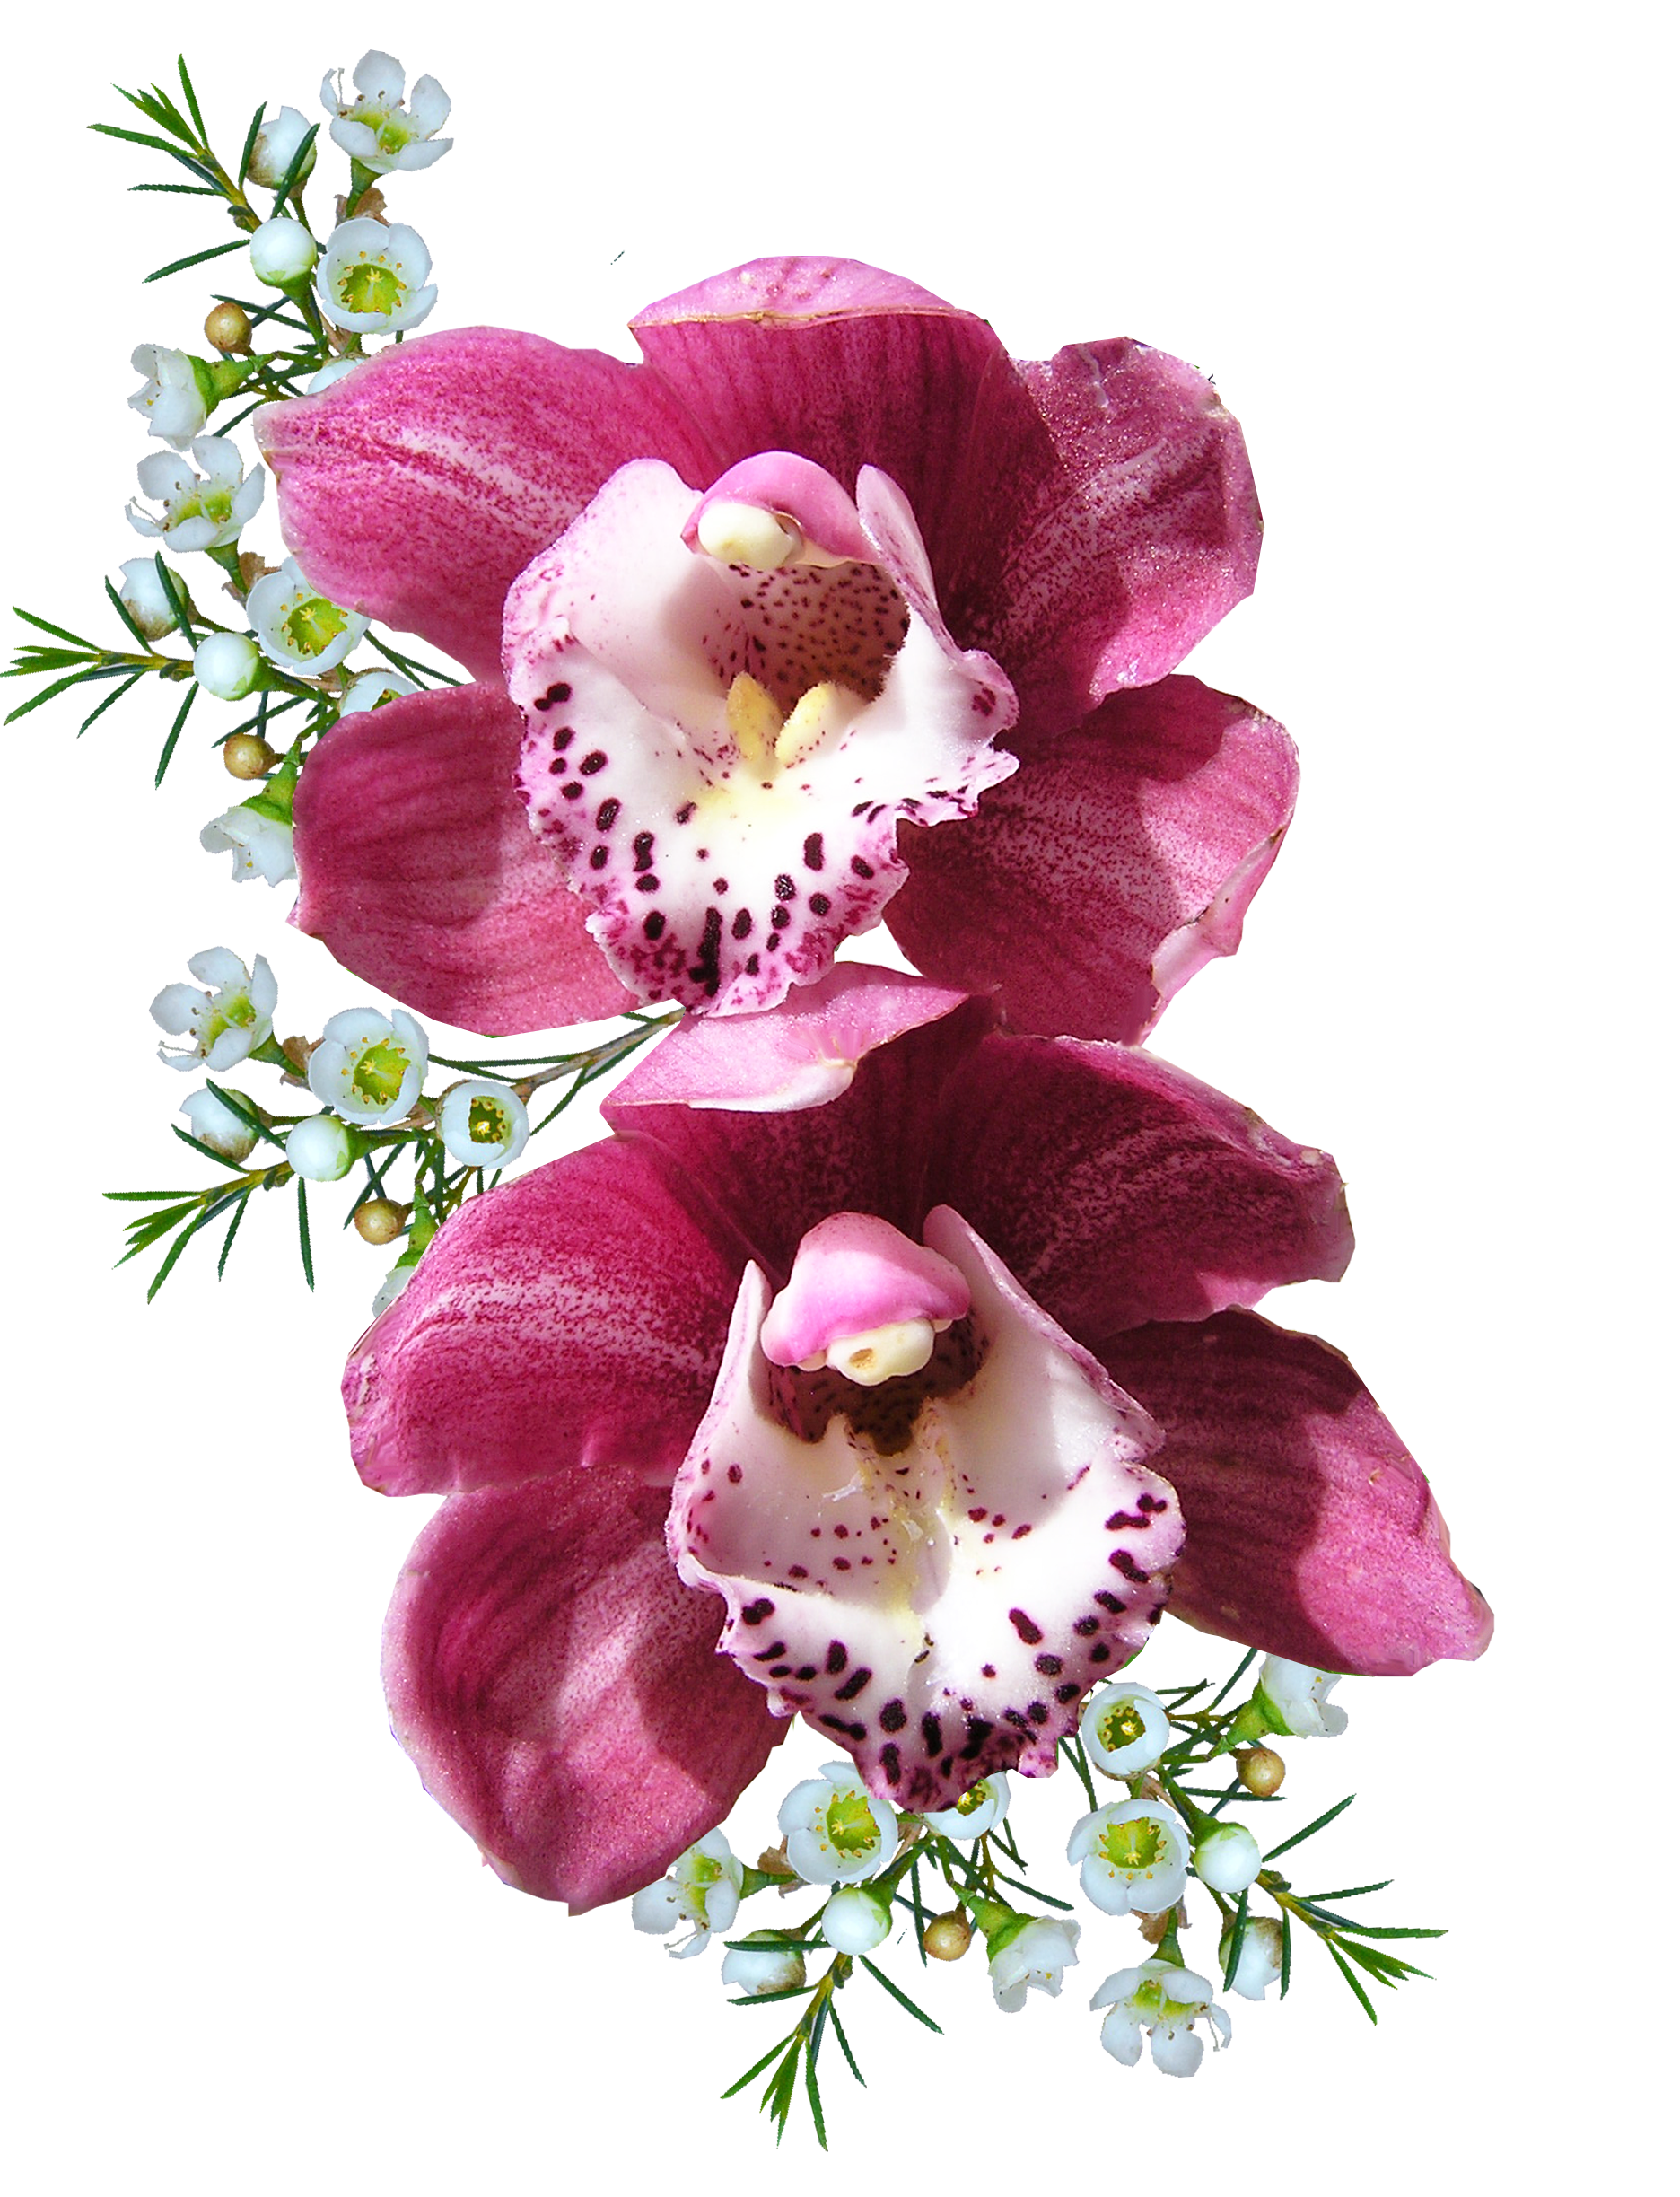 Orchid Flower PNG Image - PurePNG | Free transparent CC0 PNG Image Library